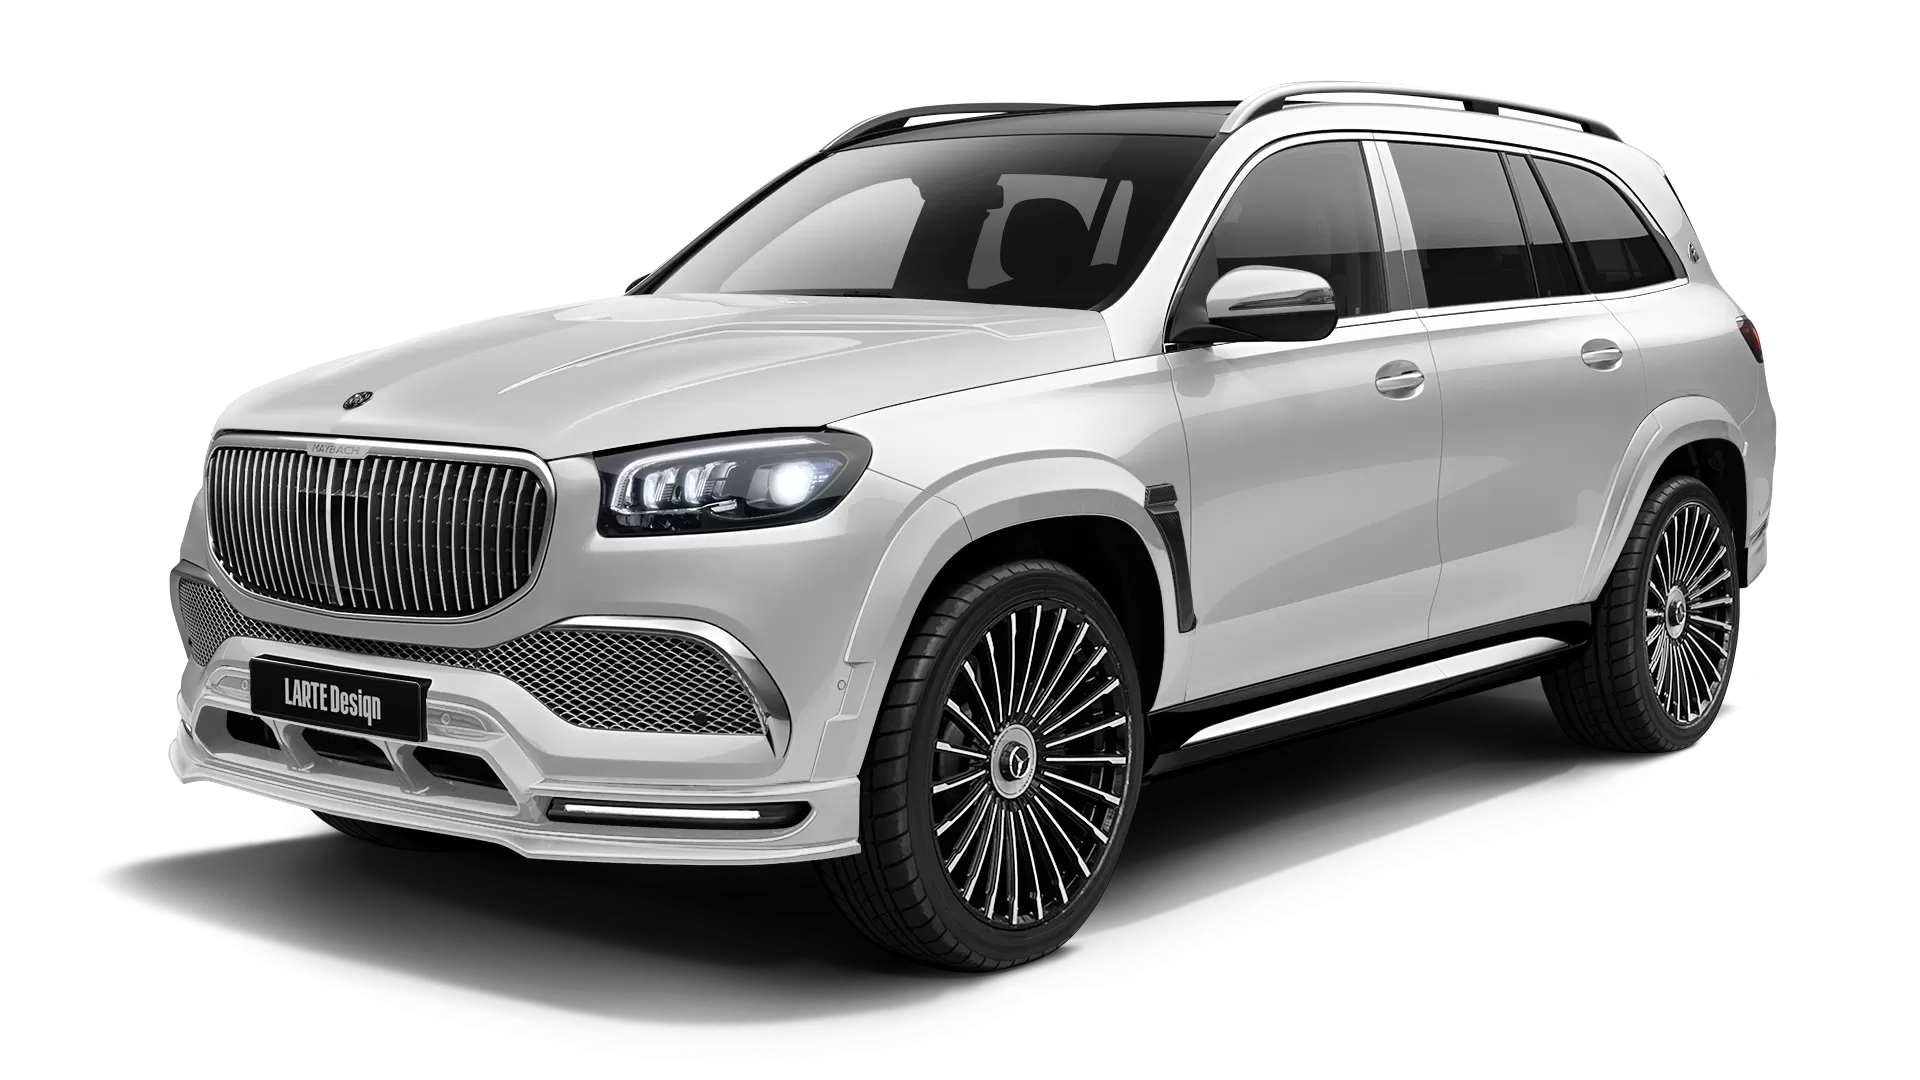 Mercedes Maybach GLS 600 with painted body kit: front view shown in Diamond White